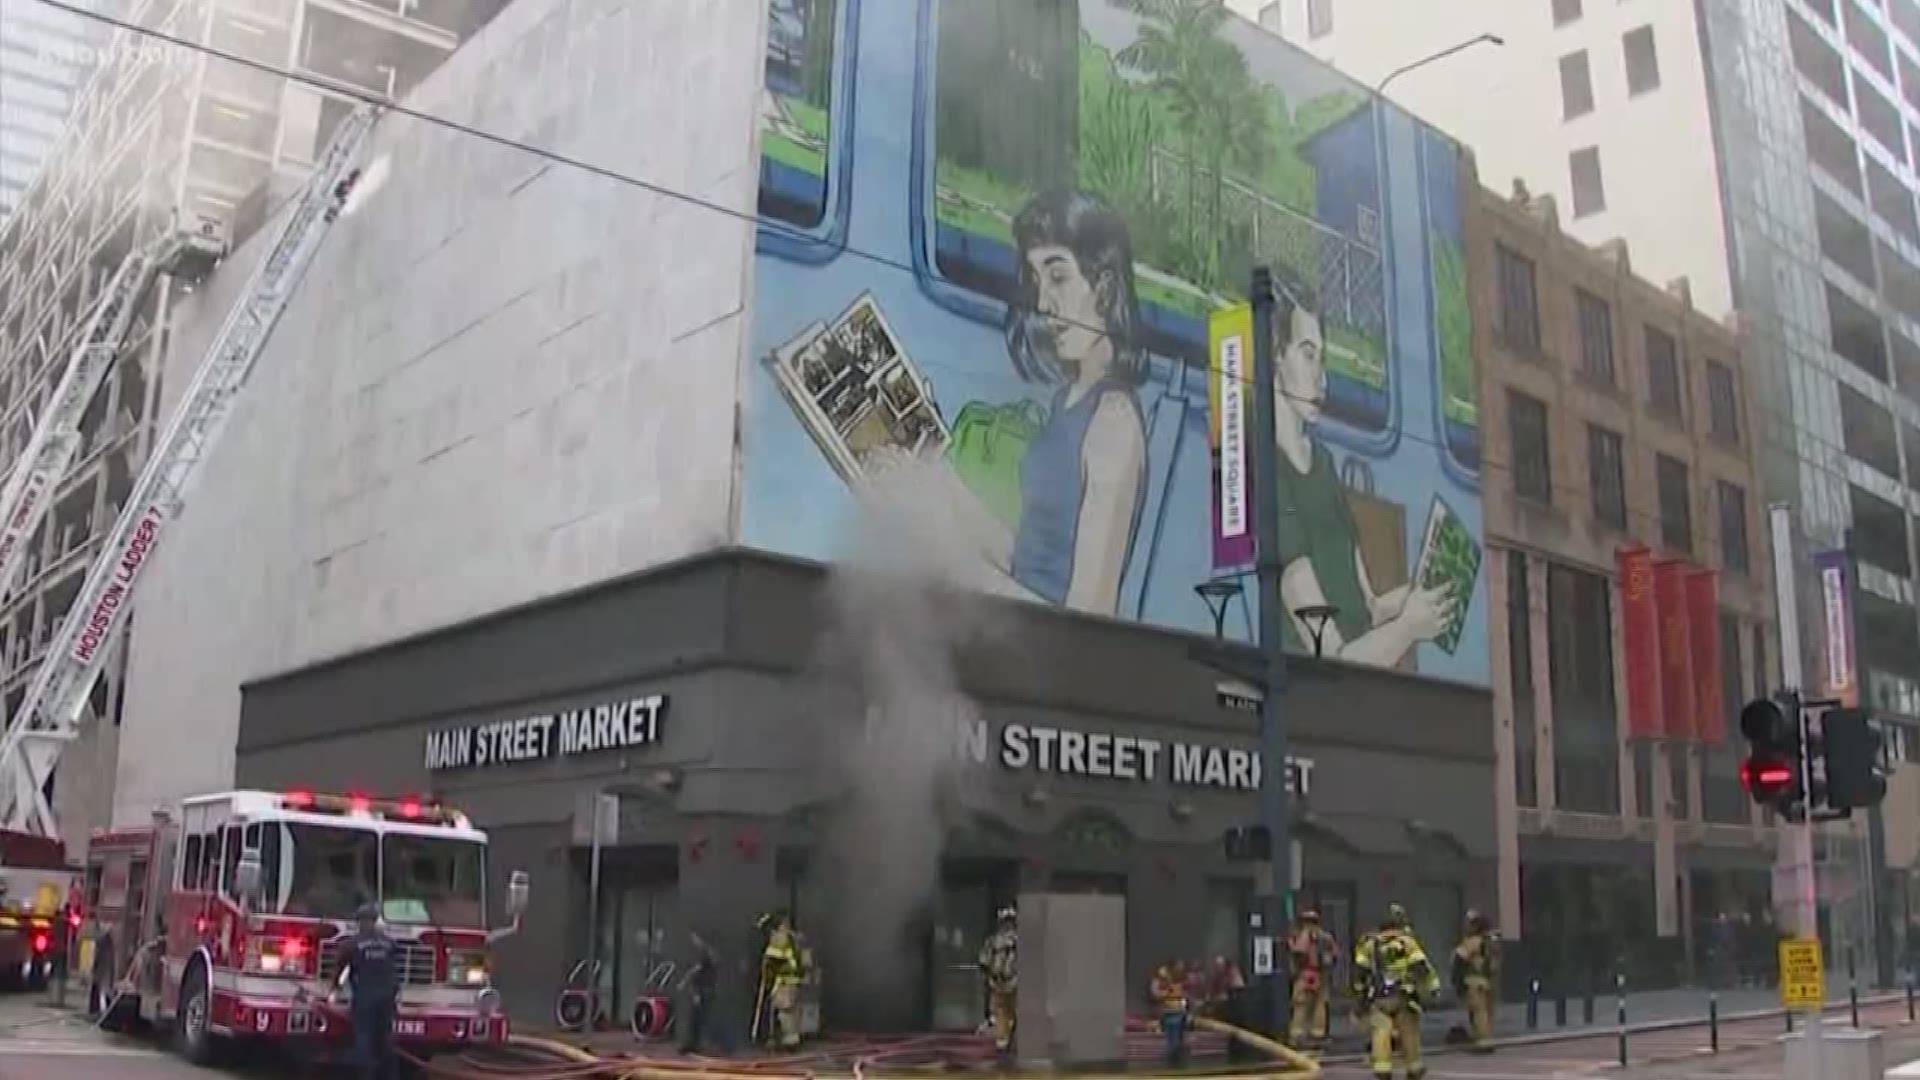 Houston fire officials say three firefighters were injured after battling a four-alarm fire at the Main Street Market in downtown Thursday morning.